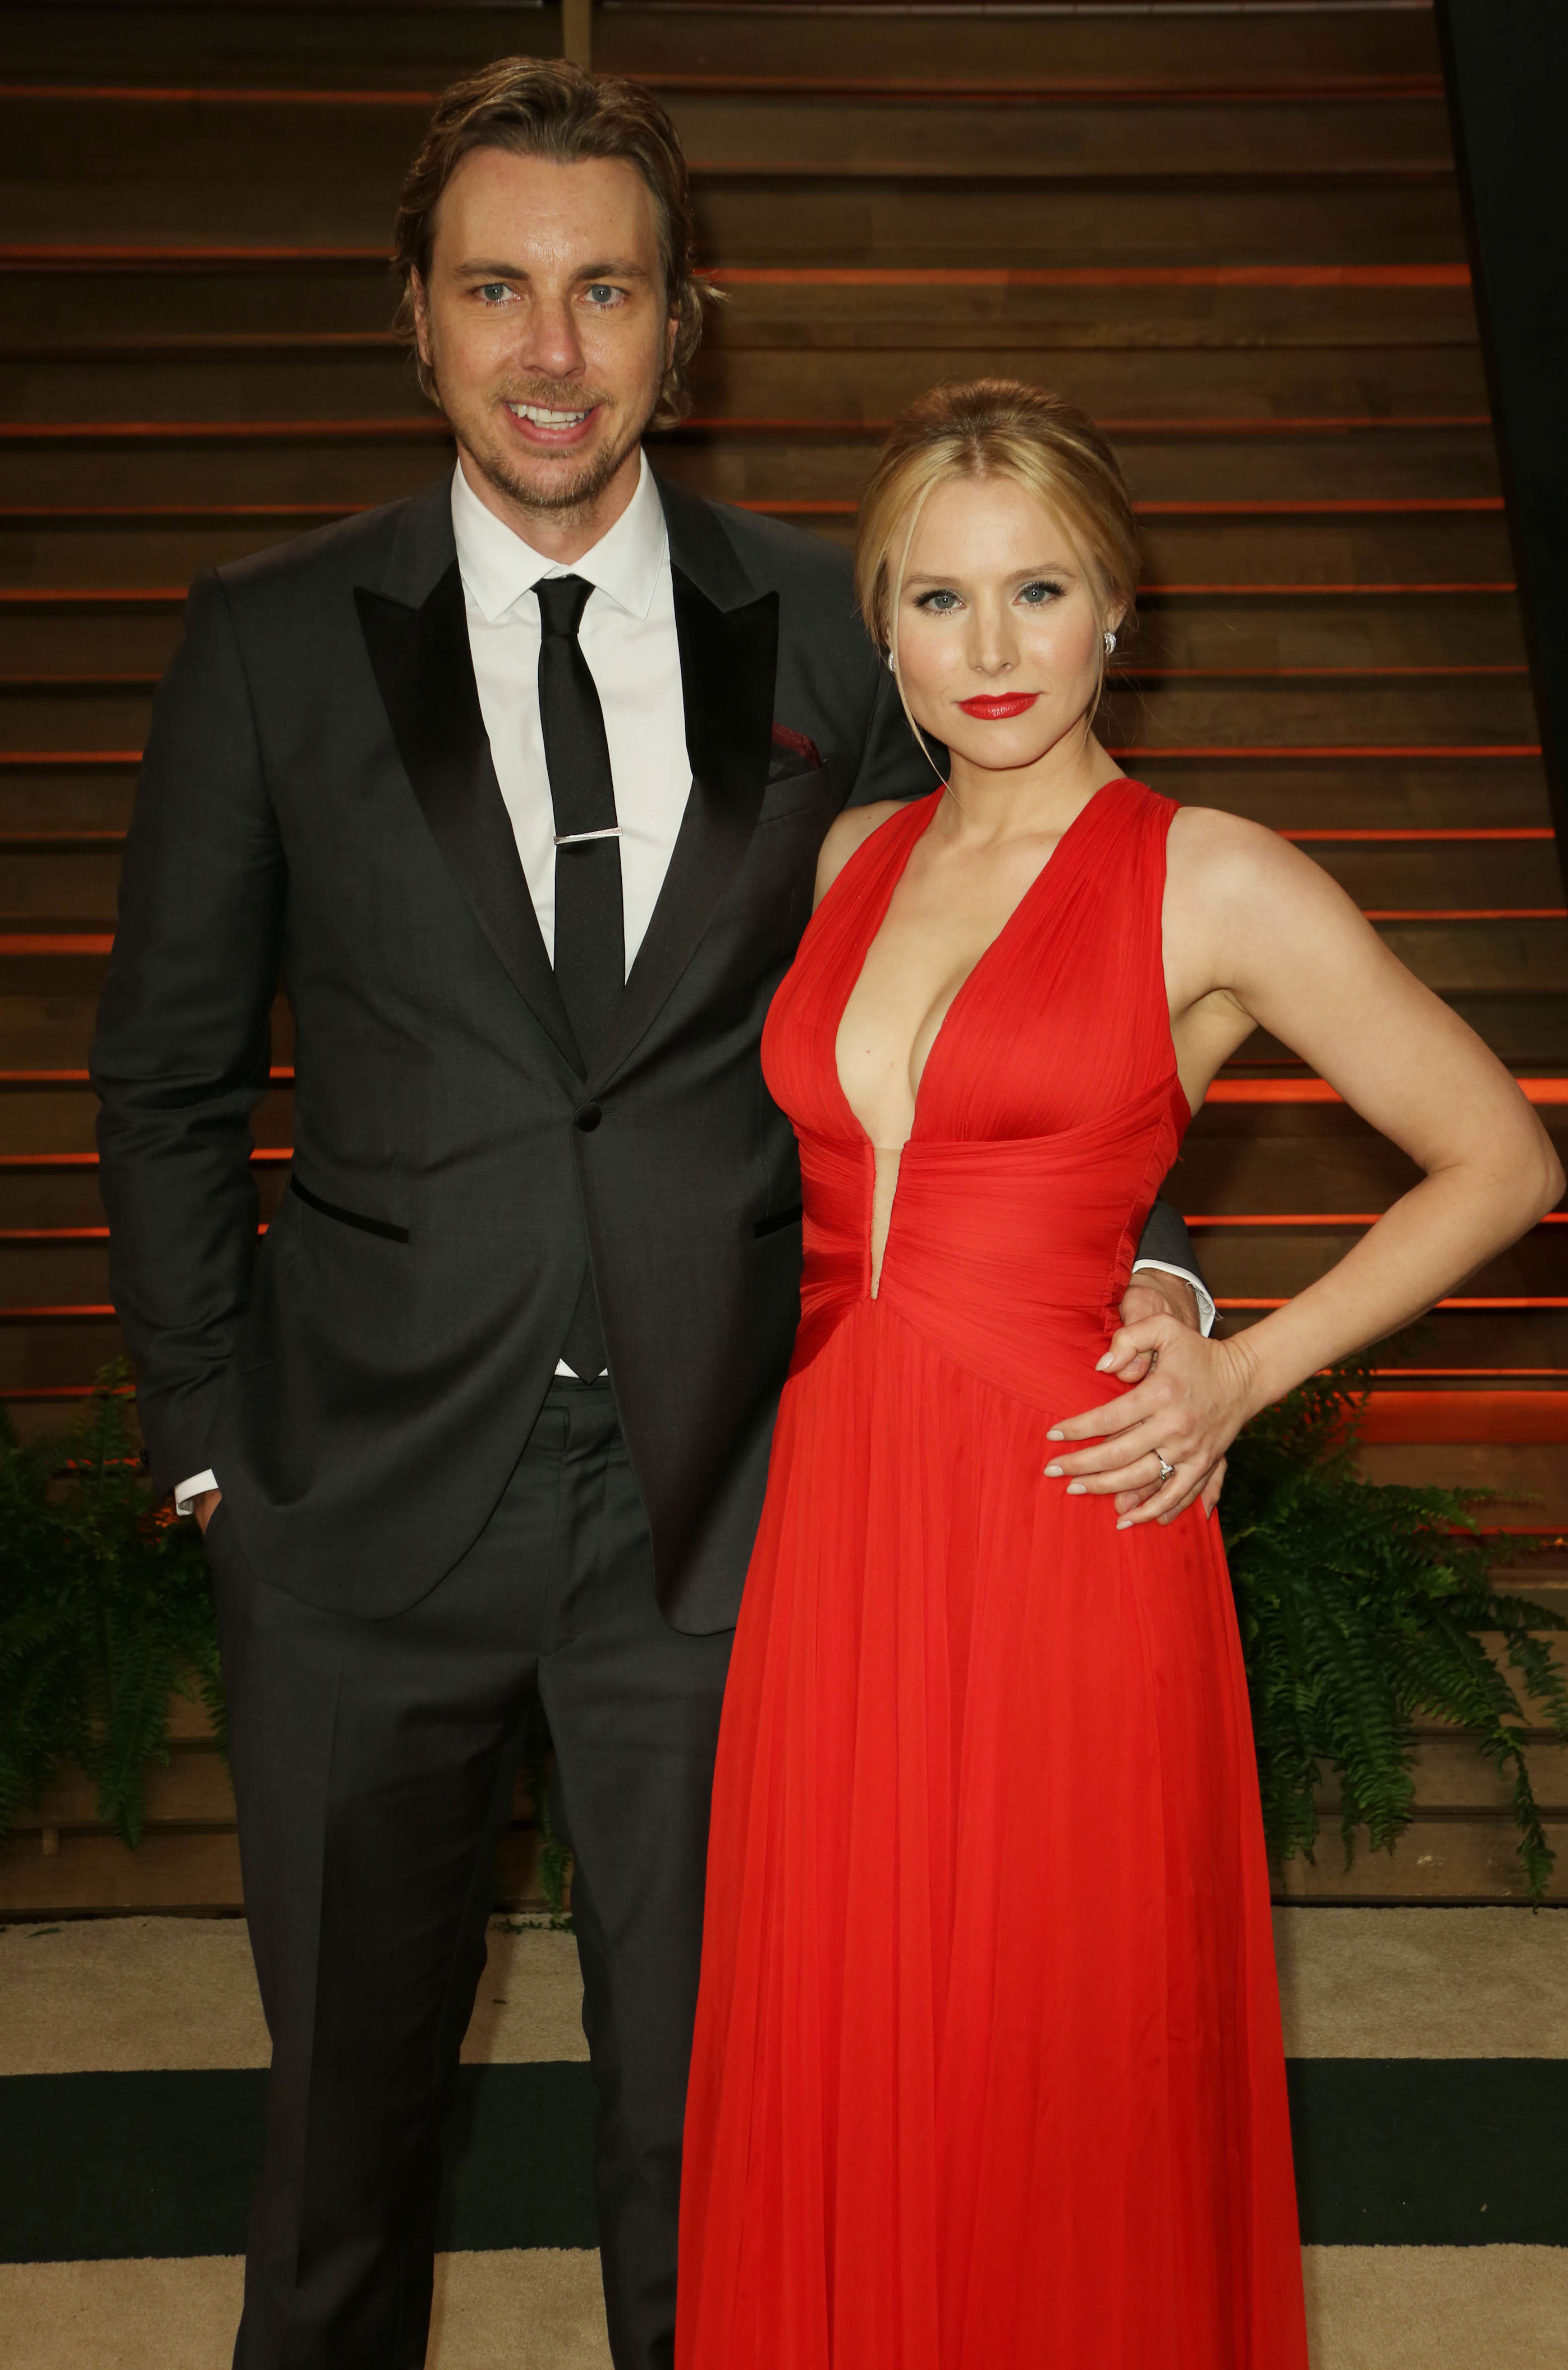 <p>On a November 2019 episode of "<a href="https://www.today.com/video/kristen-bell-remembers-the-first-time-she-met-husband-dax-shepard-73880645593">Sunday TODAY with Willie Geist,</a>" <a href="https://www.wonderwall.com/celebrity/profiles/overview/kristen-bell-561.article">Kristen Bell</a> made it clear that <a href="https://www.wonderwall.com/news/kristen-bell-recalls-no-sparks-first-time-she-met-dax-shepard-3021667.article">it wasn't exactly love at first sight</a> when she first met her now-husband, <a href="https://www.wonderwall.com/celebrity/profiles/overview/dax-shepard-1469.article">Dax Shepard</a>, at a birthday dinner for "Forgetting Sarah Marshall" producer Shauna Robertson in 2007. "I had just gotten out of a long-term relationship like two months prior, and in retrospect, I realize he had just gotten out of a long relationship. … The only thing that I remember is that he talked so much. I was like, 'This guy can talk!'" she recalled. "I didn't know who he was. I'm like, 'Maybe is that one of the guys from 'Jacka**' or something?' … He remembers, 'You were telling a really intense story about a deal you had gotten at Target,' and I was like, 'That sounds like it's on brand.' And then we left. There were no sparks whatsoever. None." Two weeks later, they met again at a hockey game and "started to flirt." The following day, he texted her. Dished the actress, "I get a text that says, 'Hi, my name is Dax. I violated your privacy and got your number from Shauna. How do you feel about that?' And I was like, 'Excuse me? You sound stimulating.' … He's so bold, and that was my kind of person. I was like, 'OK, starting it off with a really good joke that makes me feel, like, butterflies." Added the "Frozen" star, "I fell in love with him way before he fell in love with me."</p>